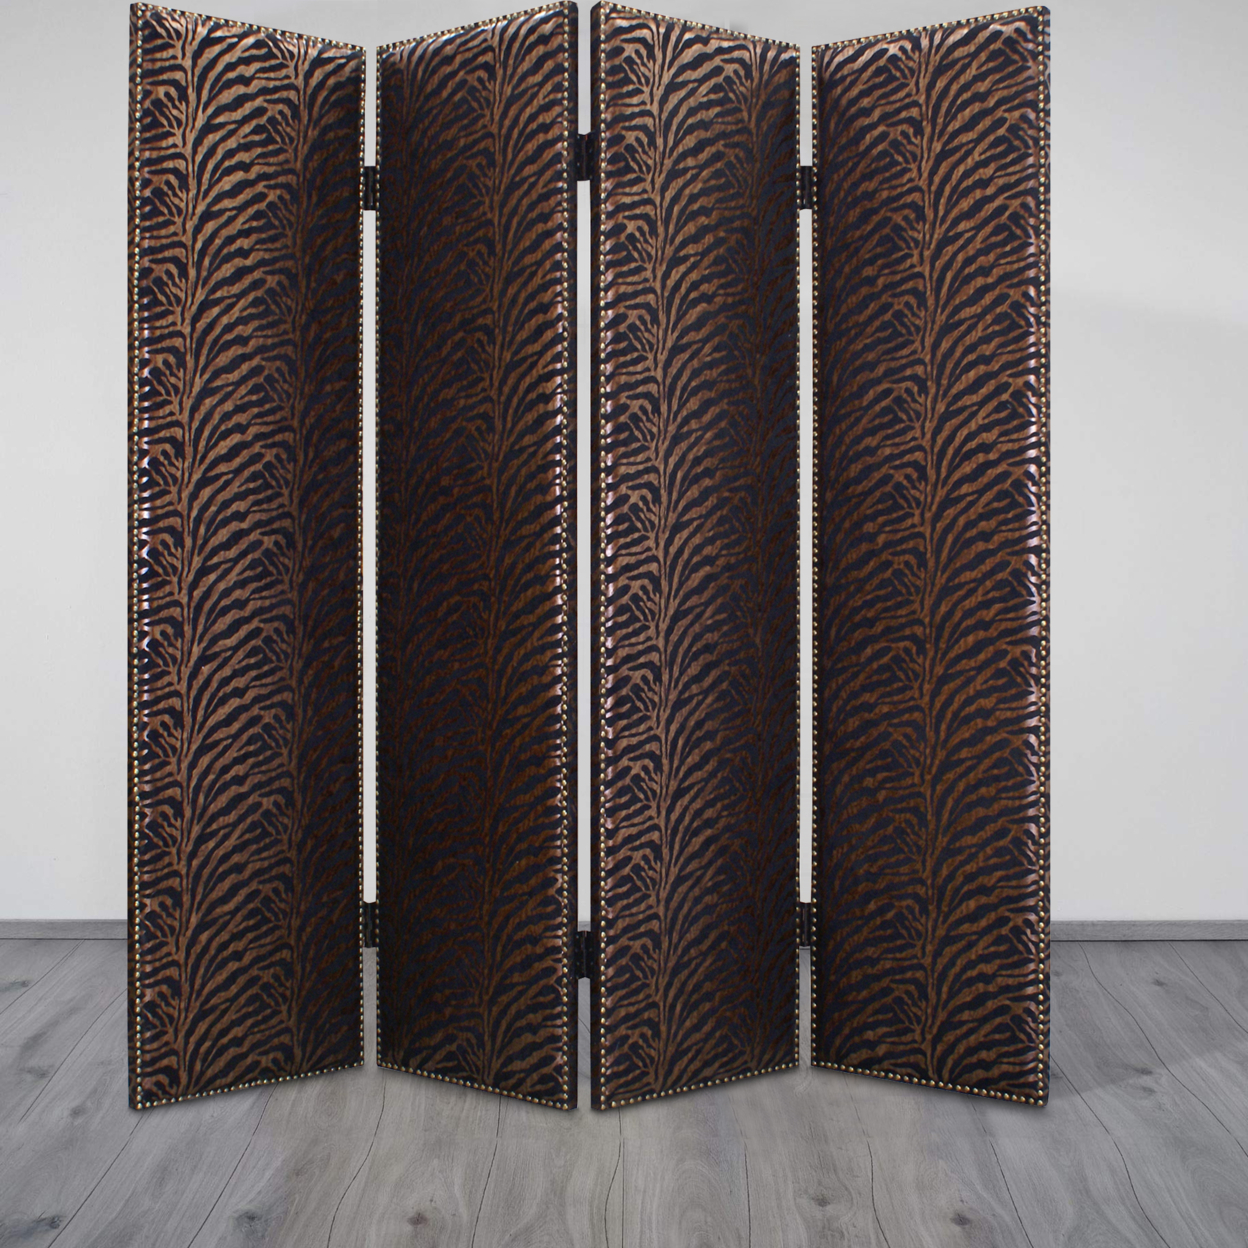 Wooden 4 Panel Screen With Nailhead Trim Accents, Black And Bronze- Saltoro Sherpi